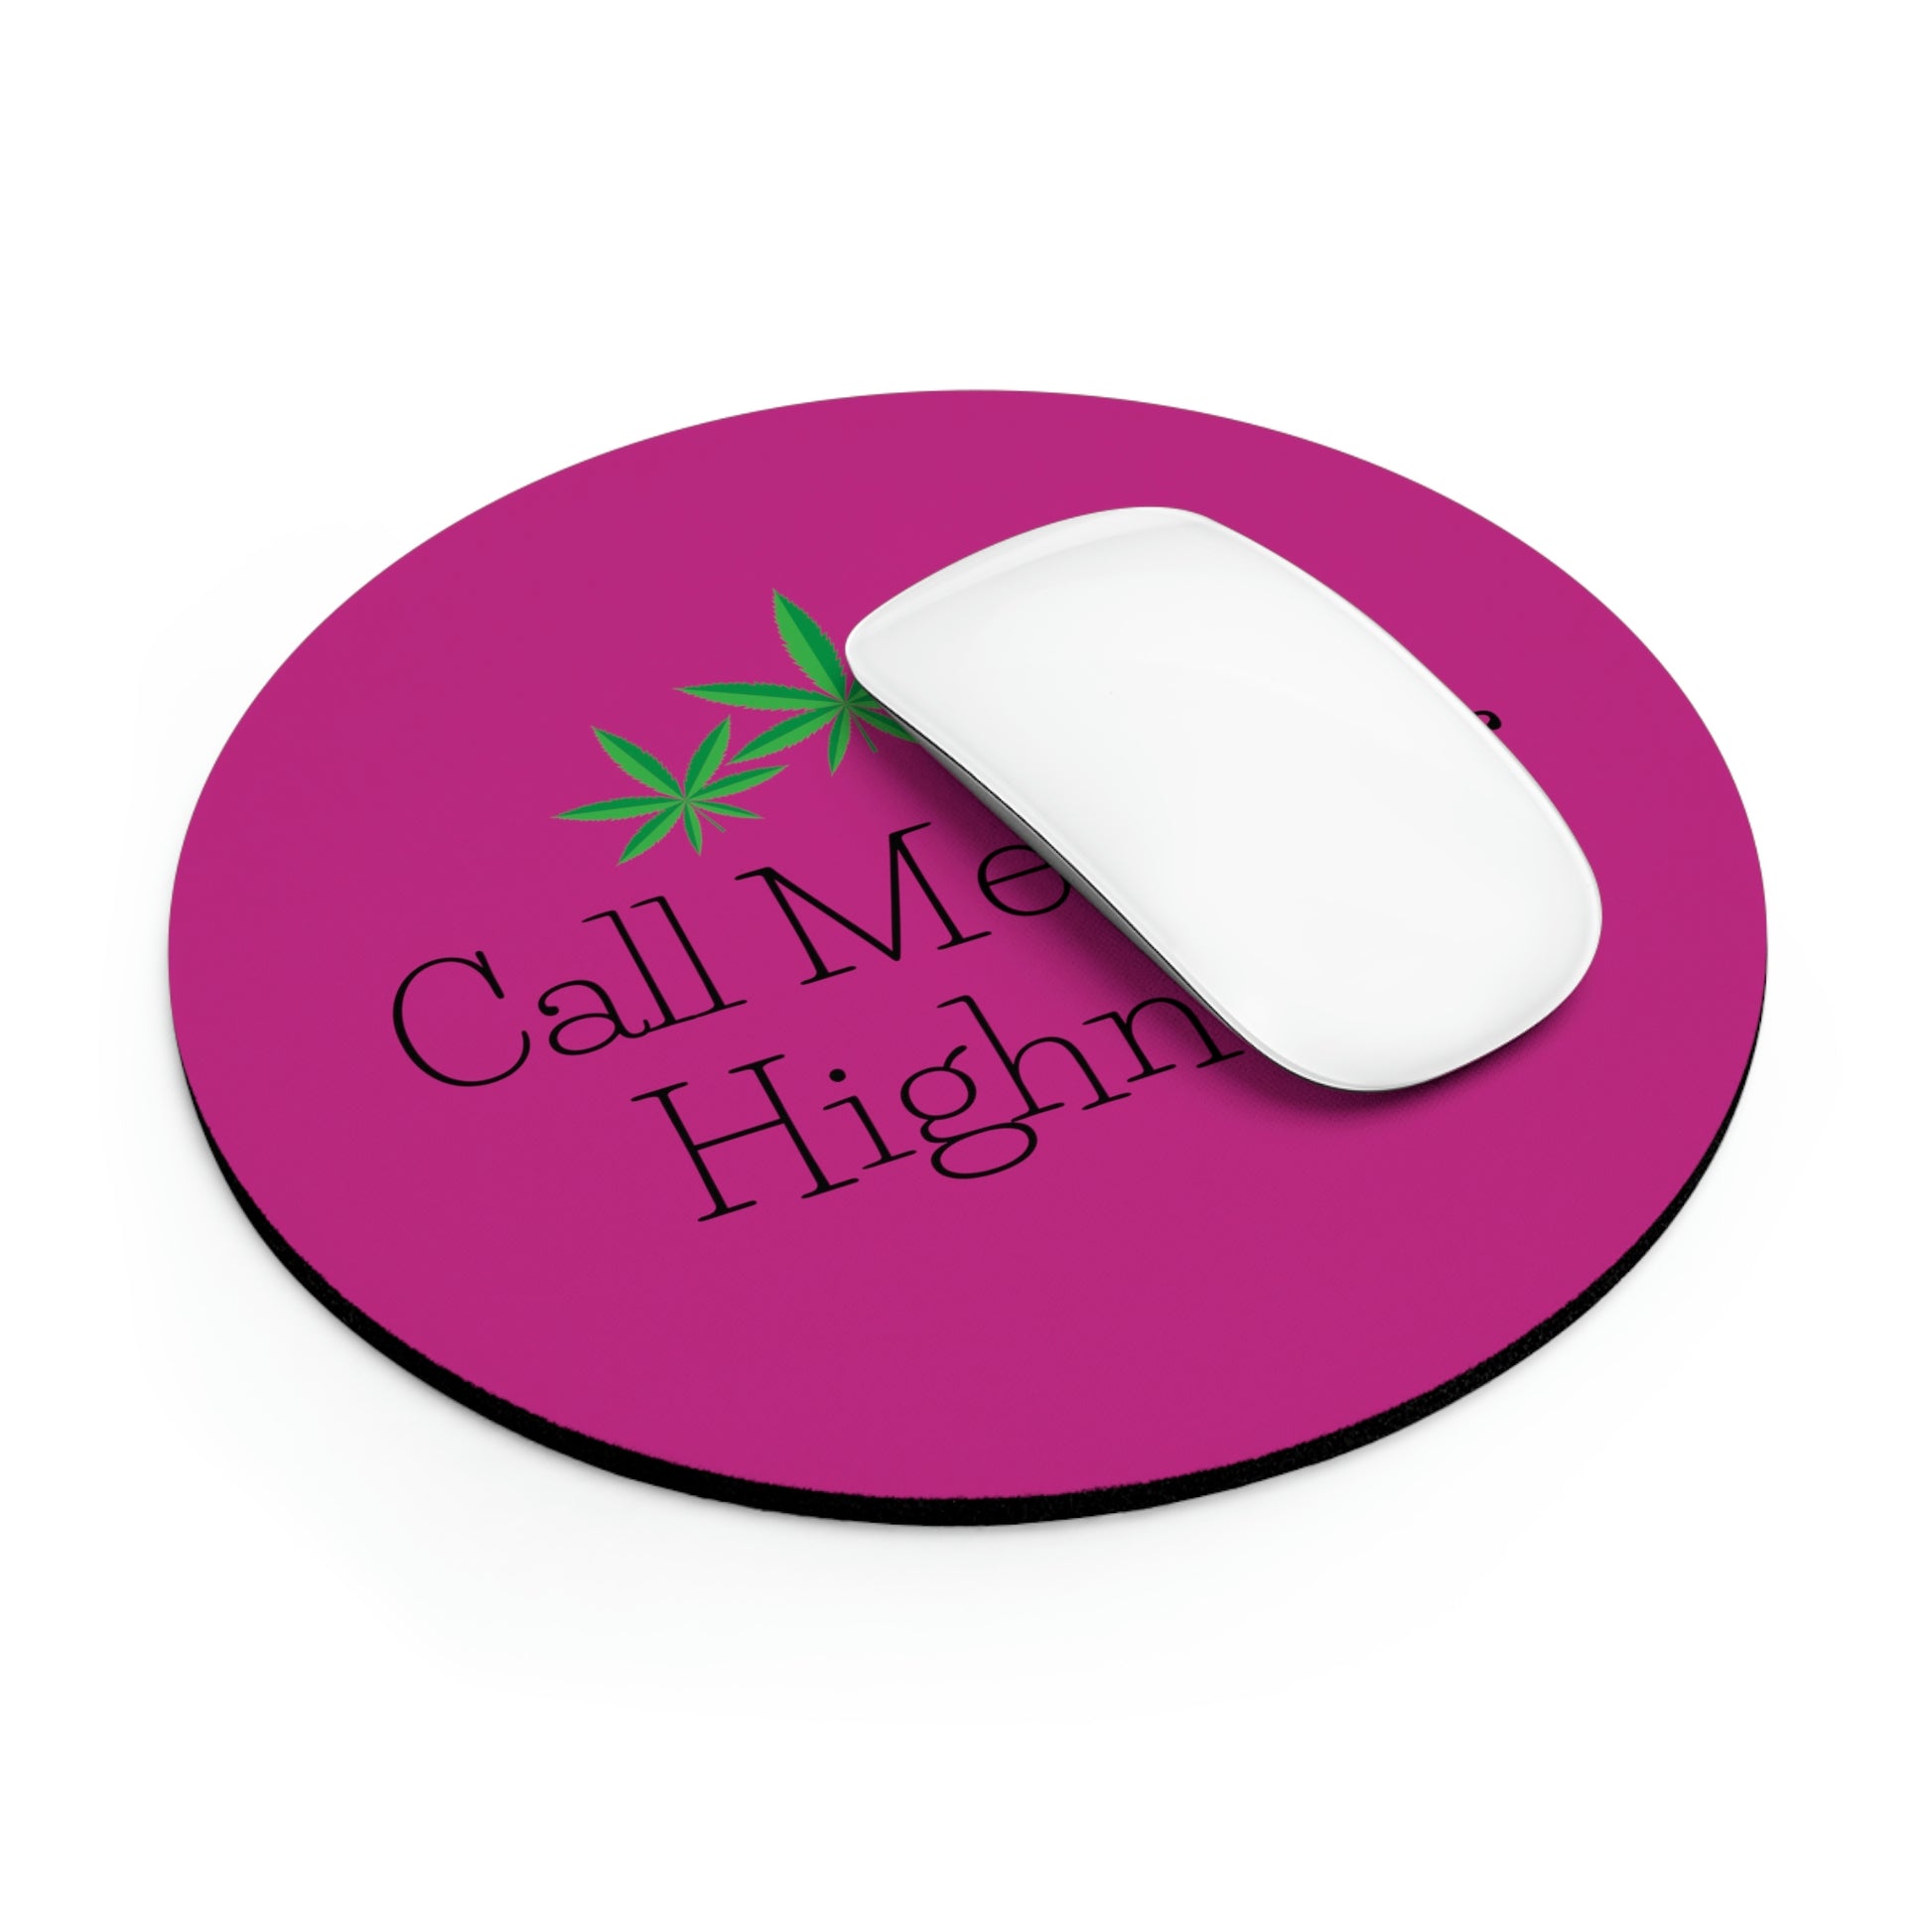 A nice picture showing the Call Me Your Highness Mouse Pad being displayed in bright pink colorsplash.